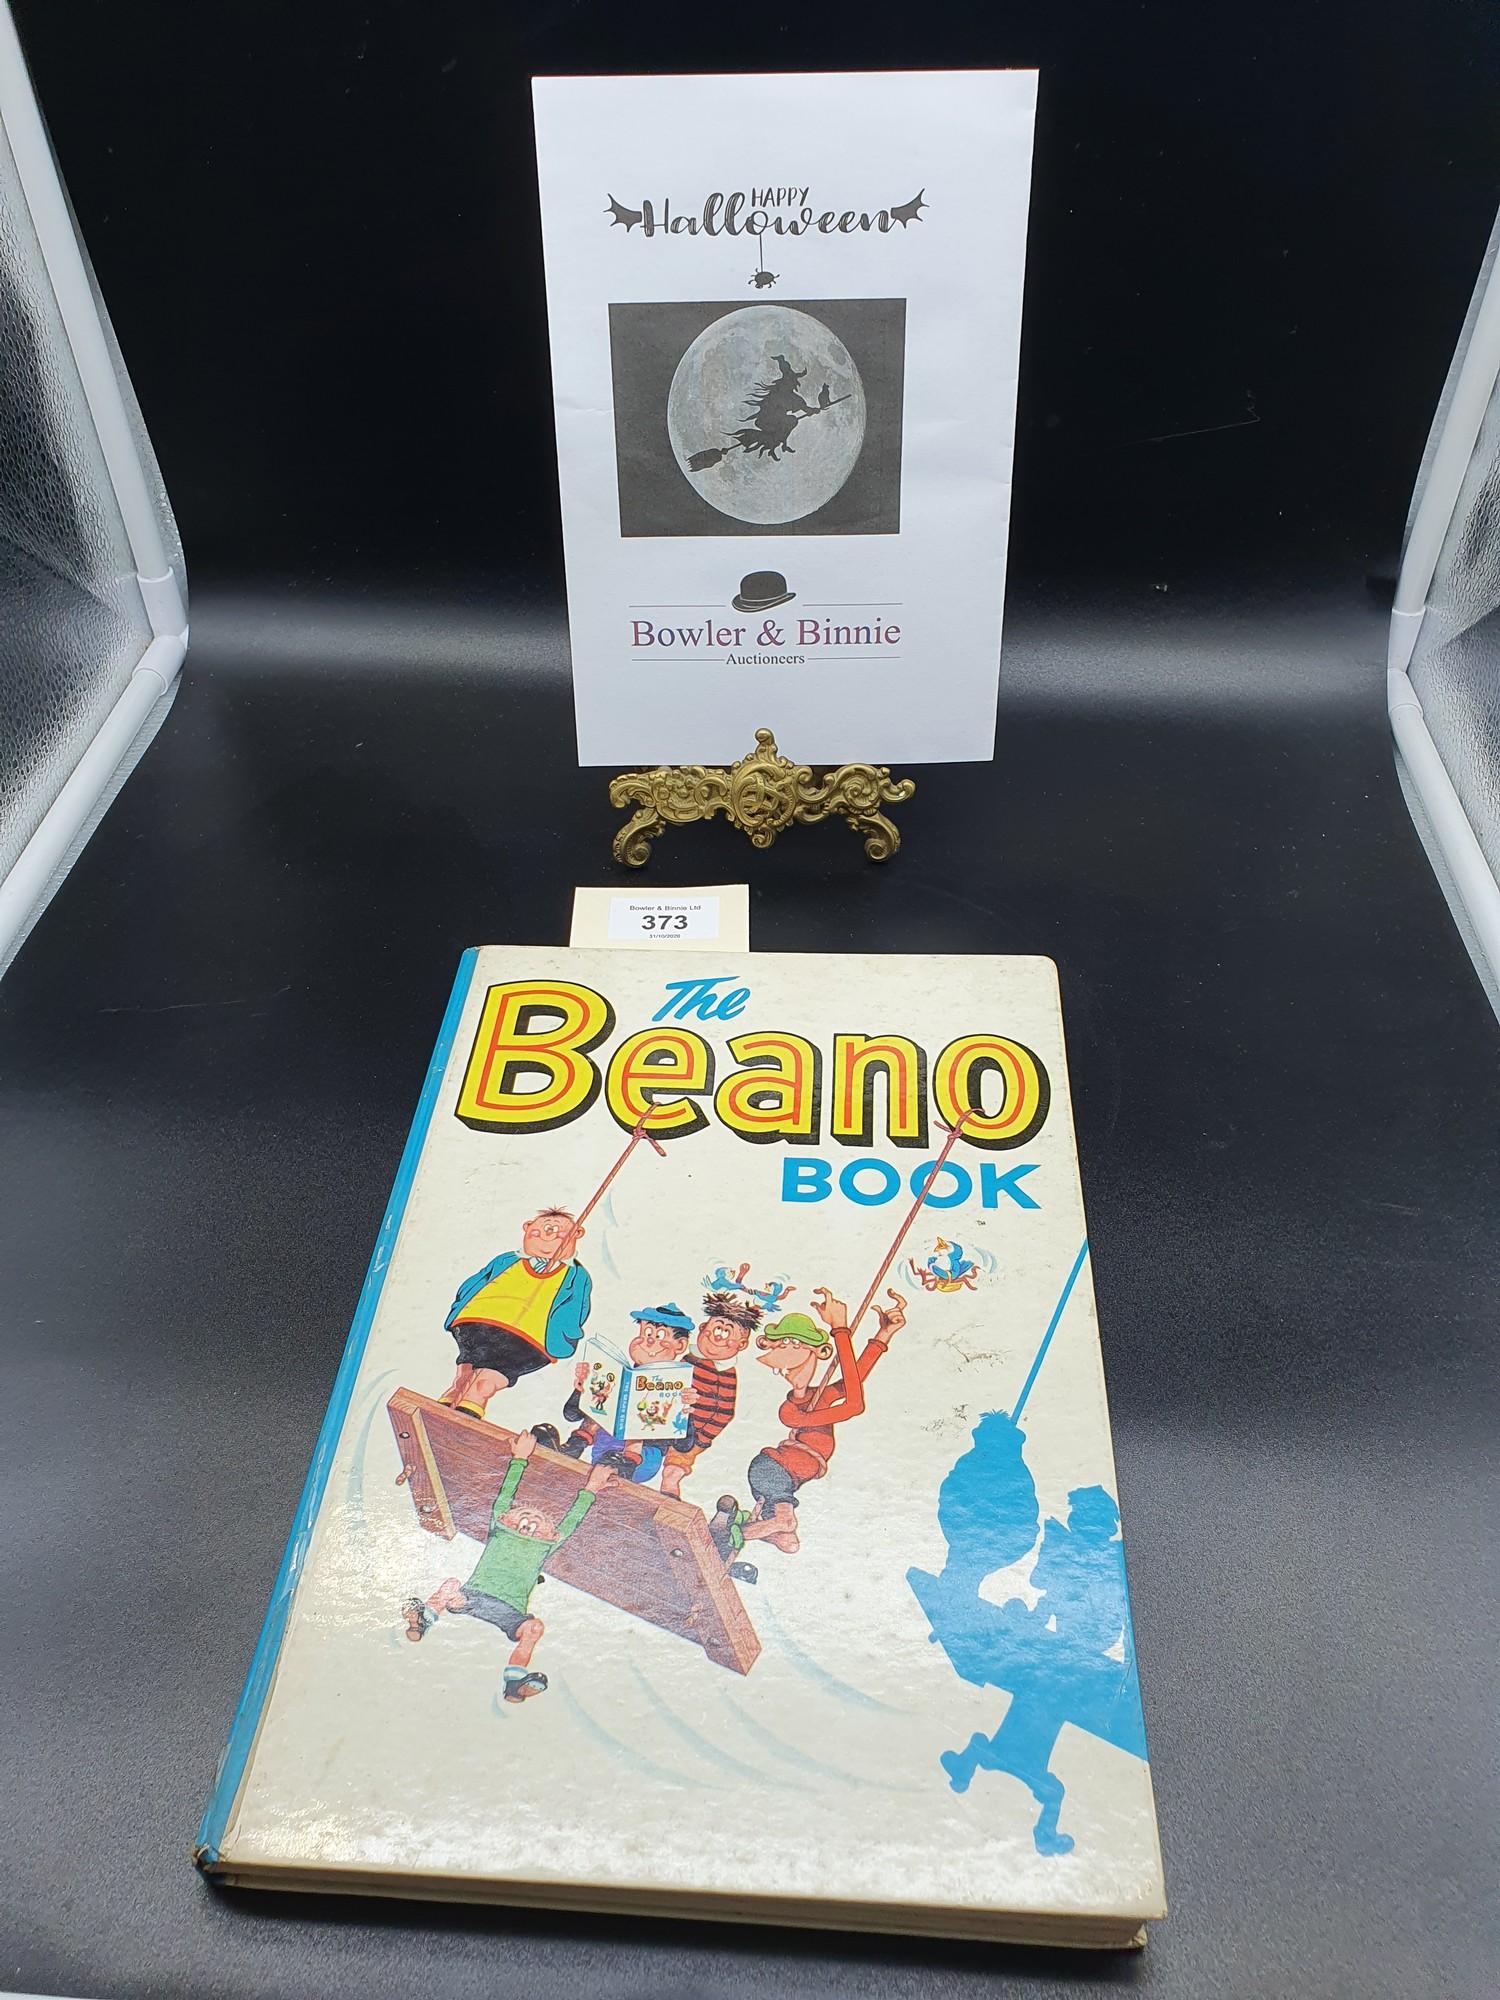 1963 The Beano Book 1st edition. Very good condition.